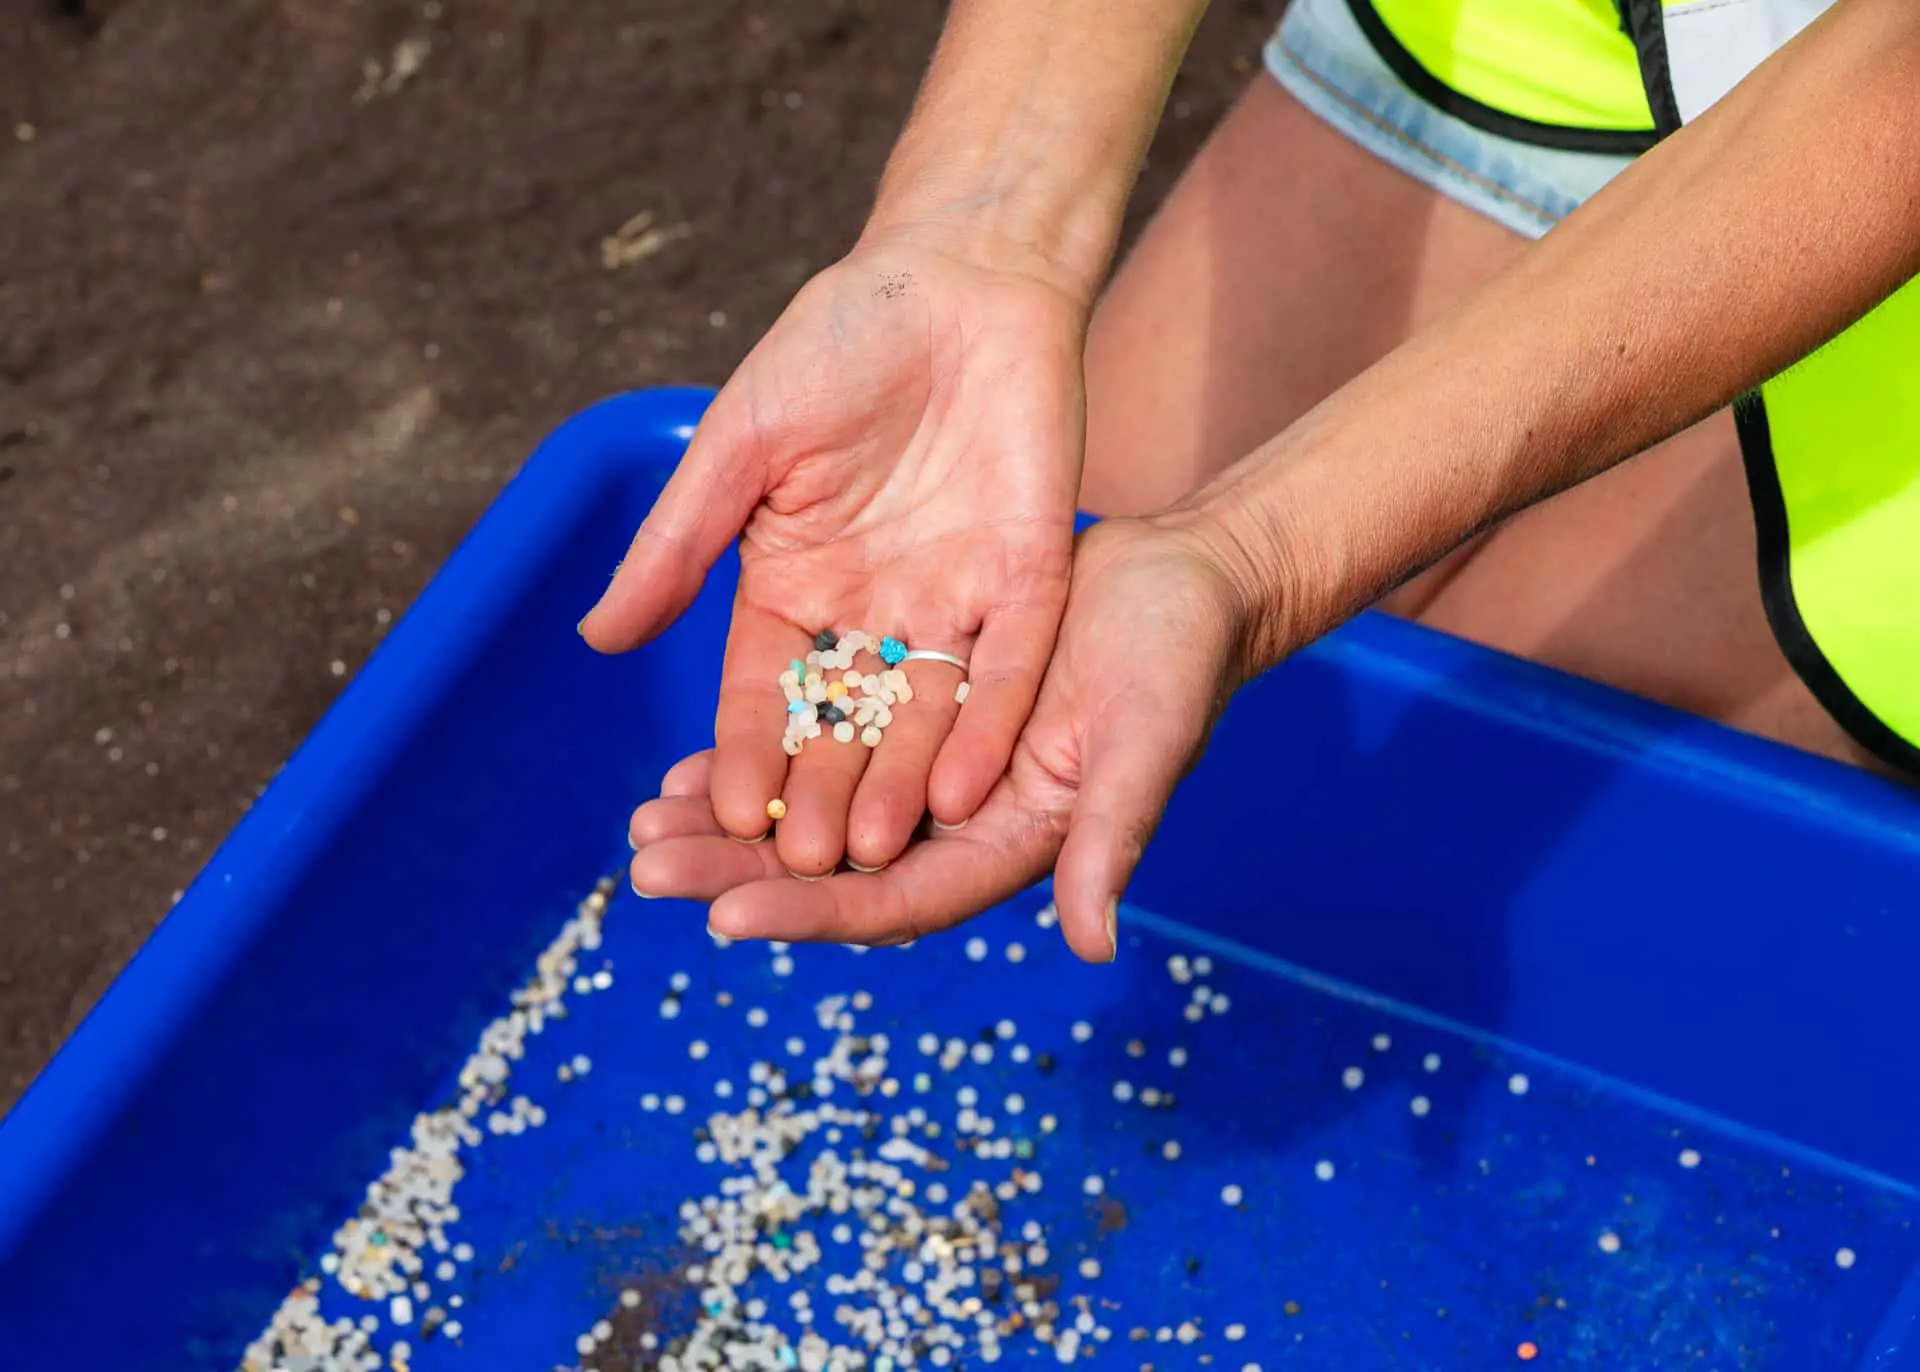 Nurdles being held in the palm of someone's hand on the beach